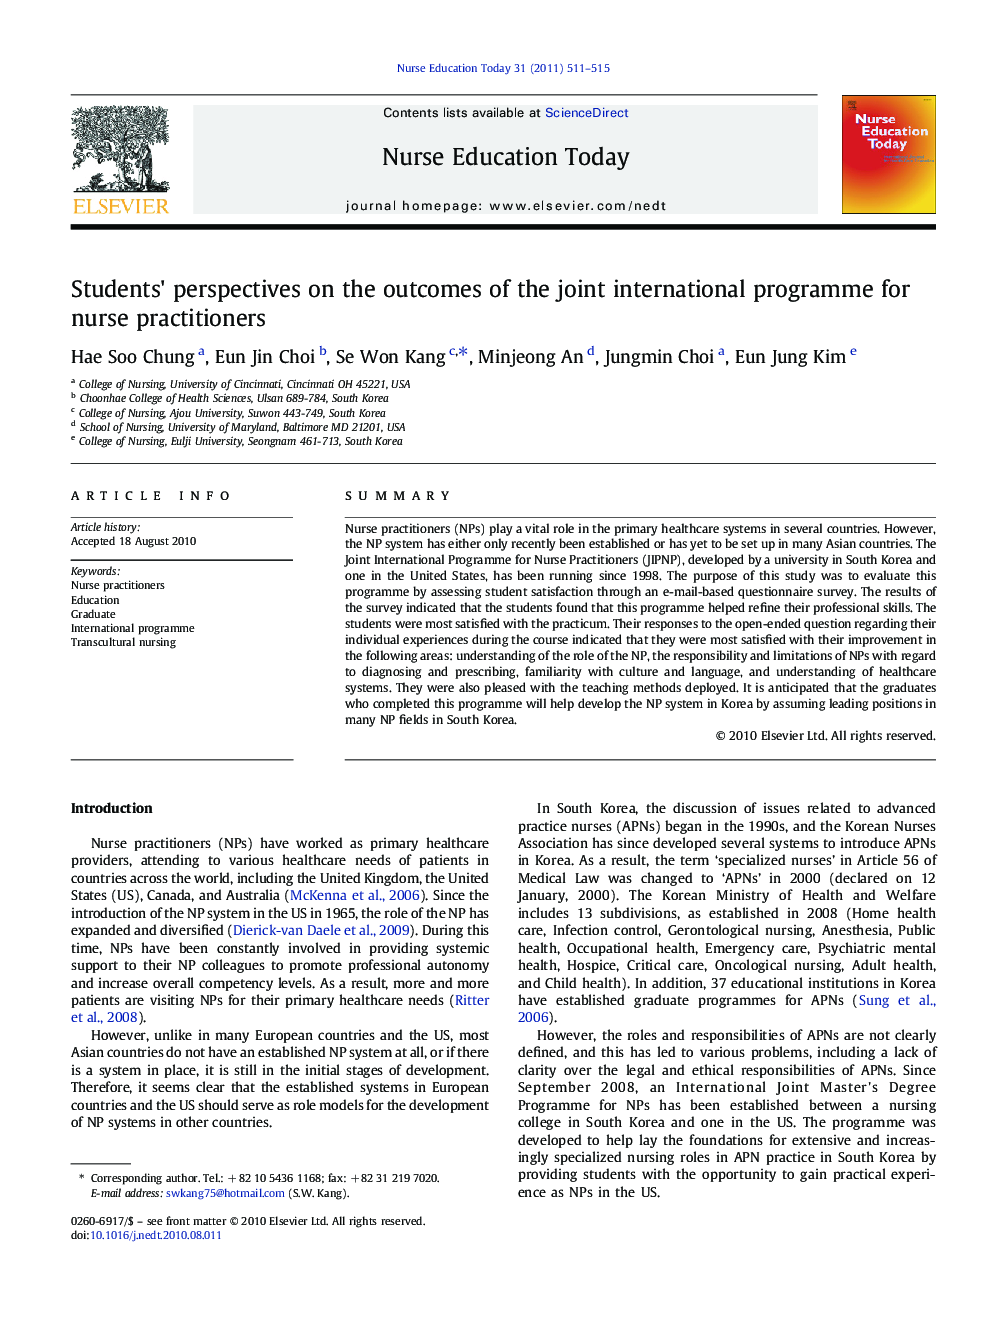 Students' perspectives on the outcomes of the joint international programme for nurse practitioners